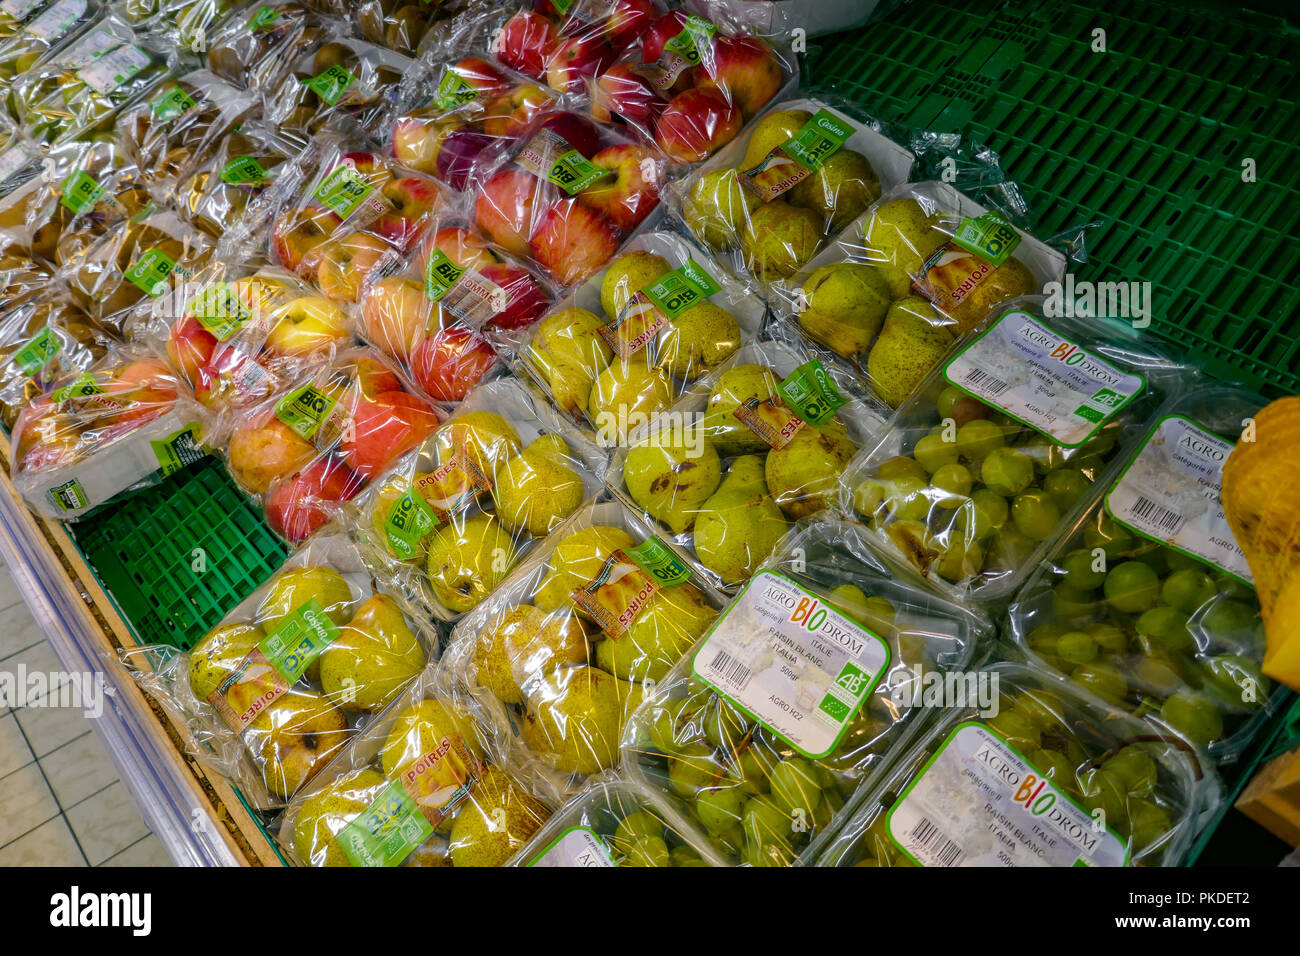 apples, pears, grapes, Fruit packed in plastic in a French supermarket Stock Photo